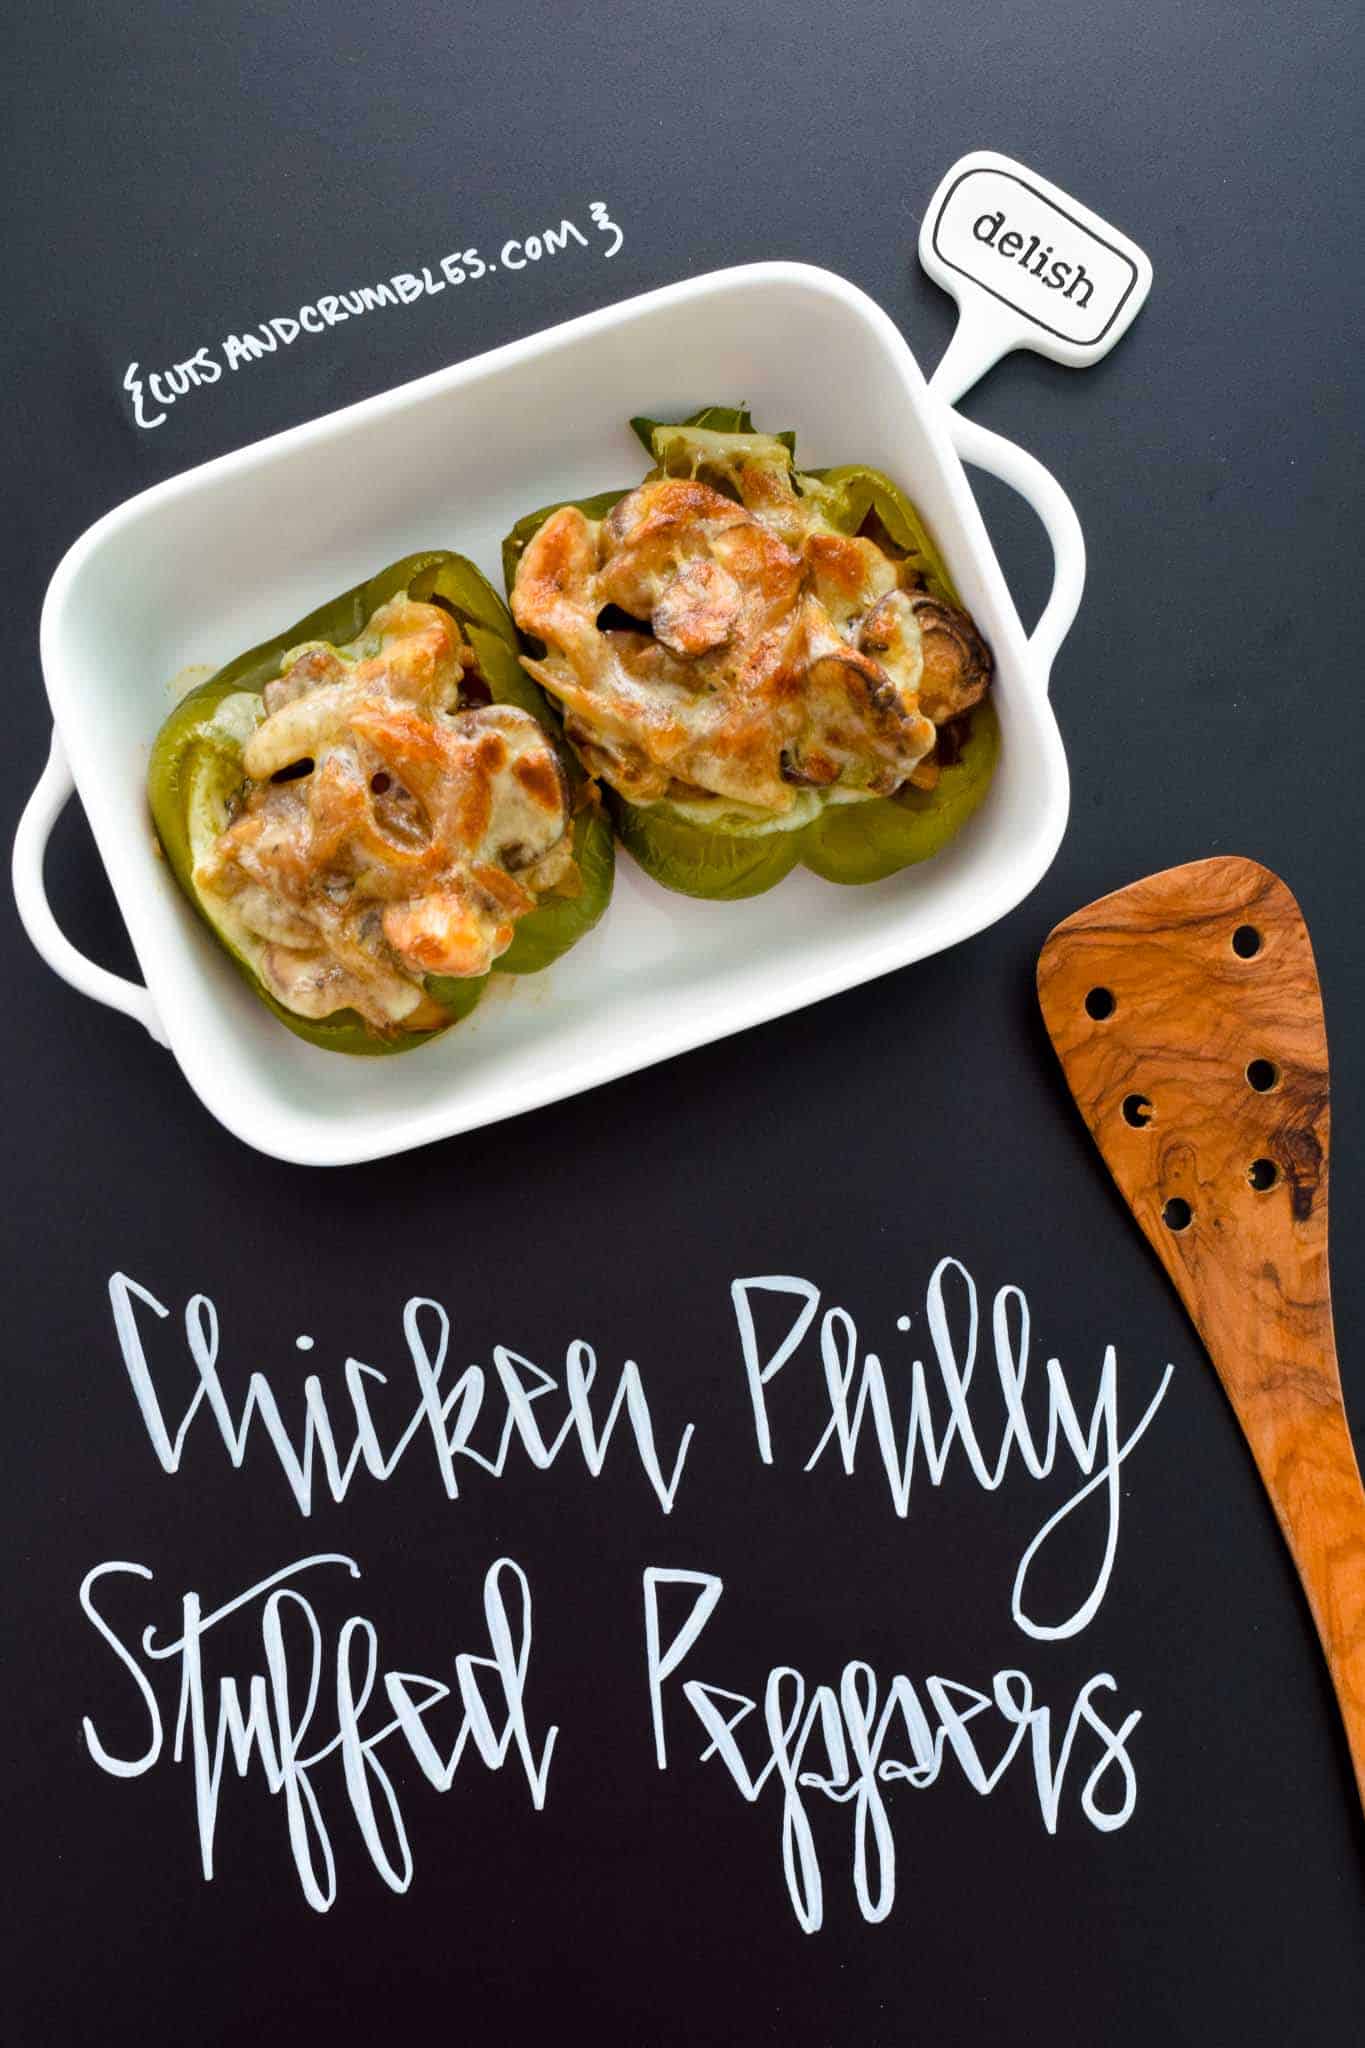 Chicken Philly Stuffed Peppers with title written on chalkboard